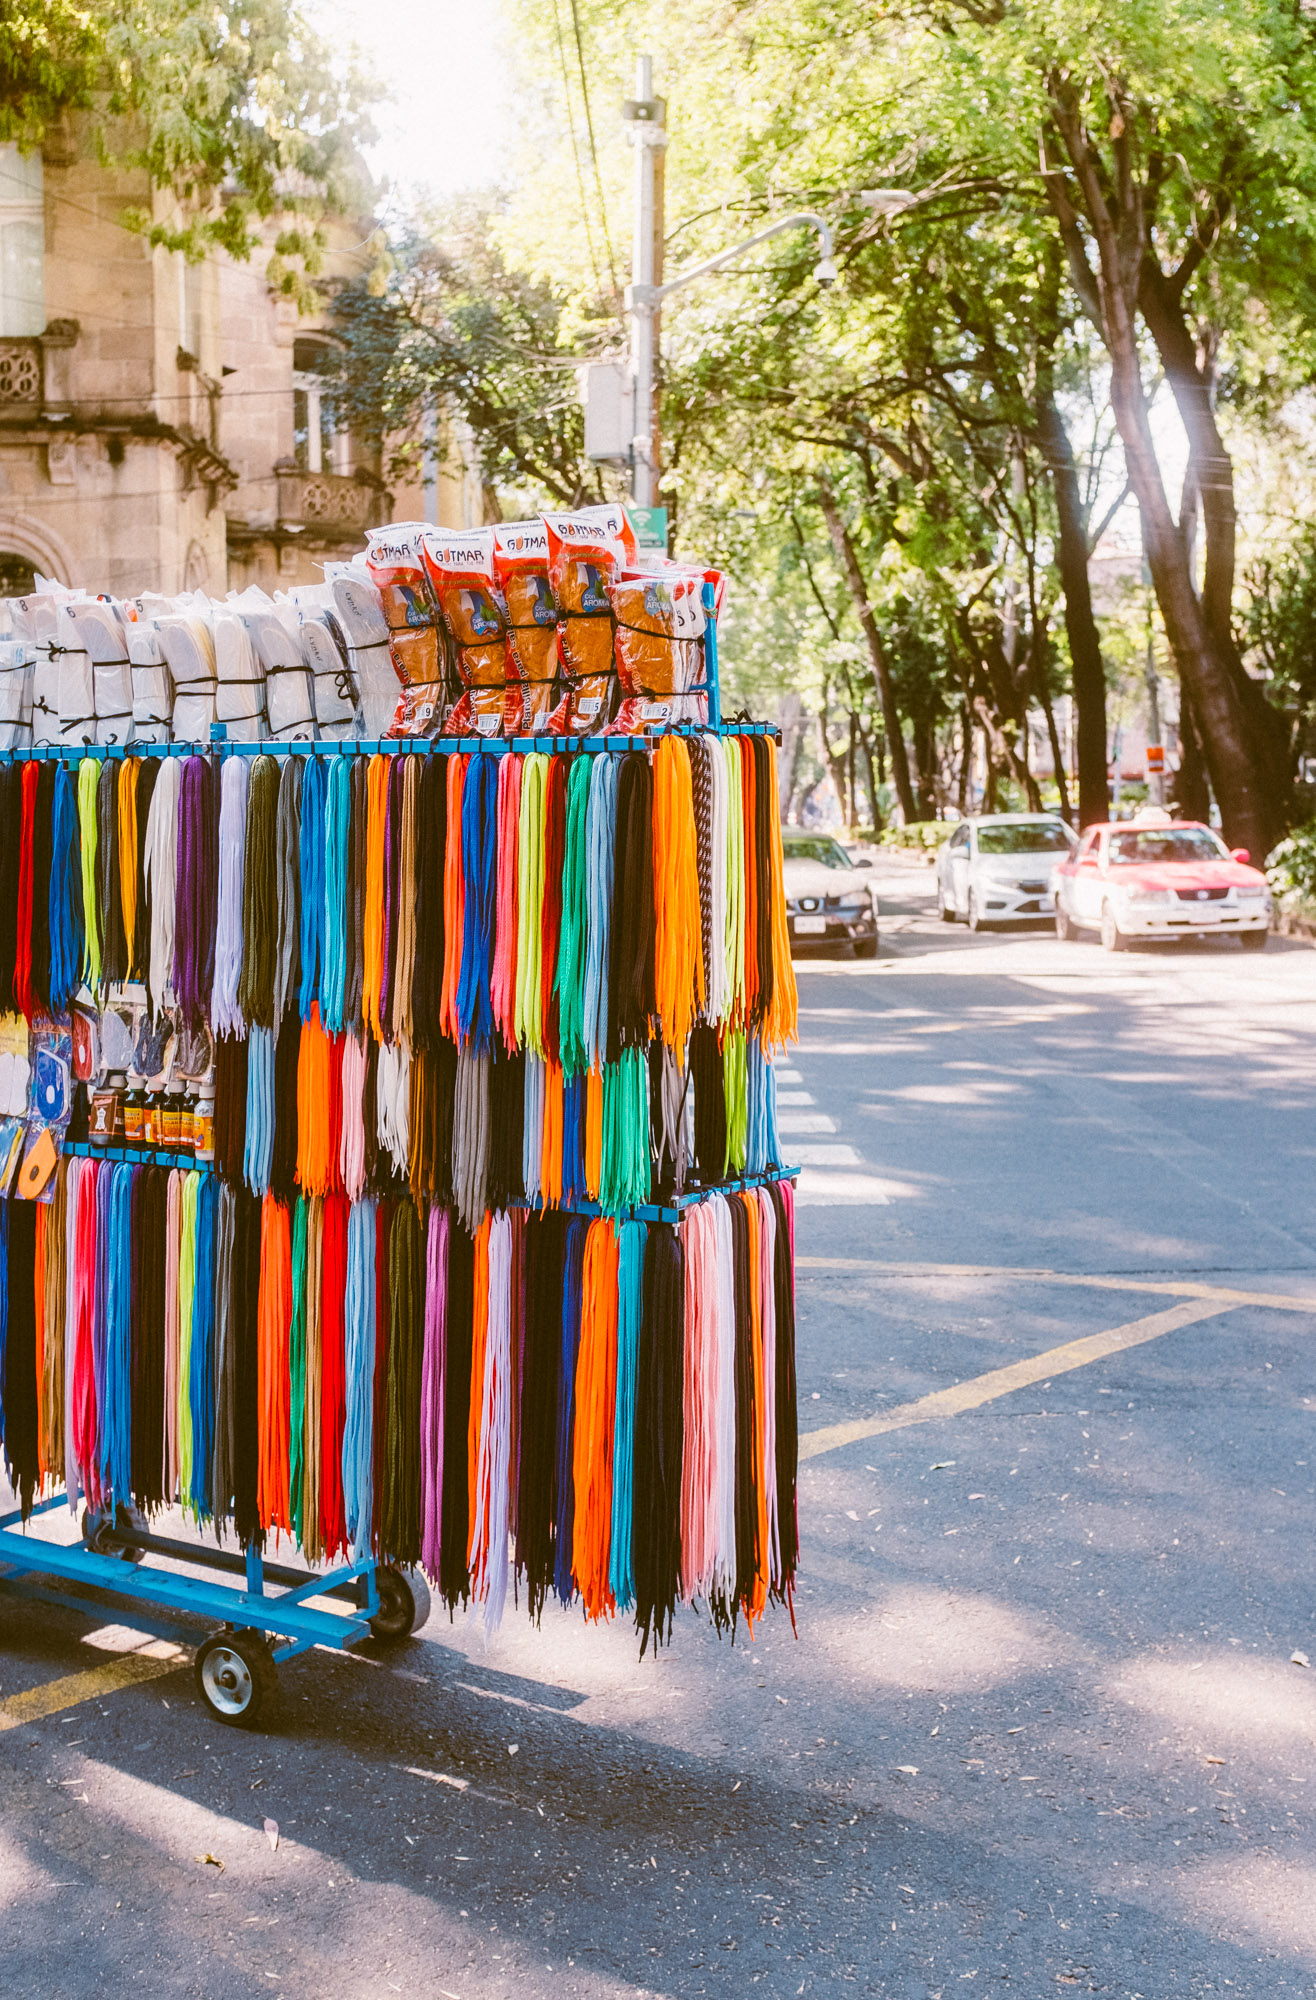 Walking around Juarez, La Condesa and Roma Sur - Travelling to Mexico City - Jeff On The Road - Jeff Frenette Photography